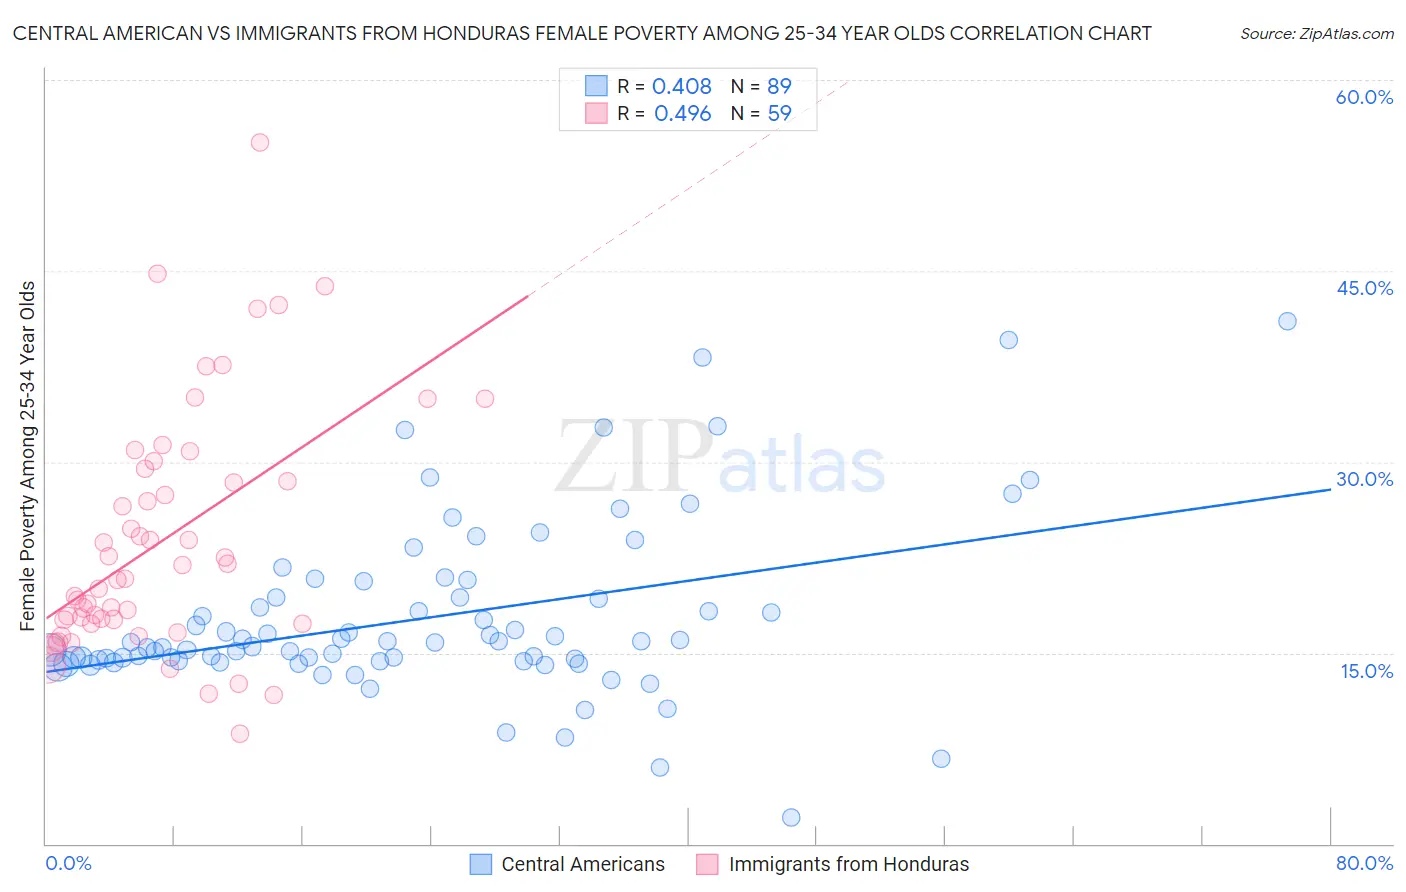 Central American vs Immigrants from Honduras Female Poverty Among 25-34 Year Olds